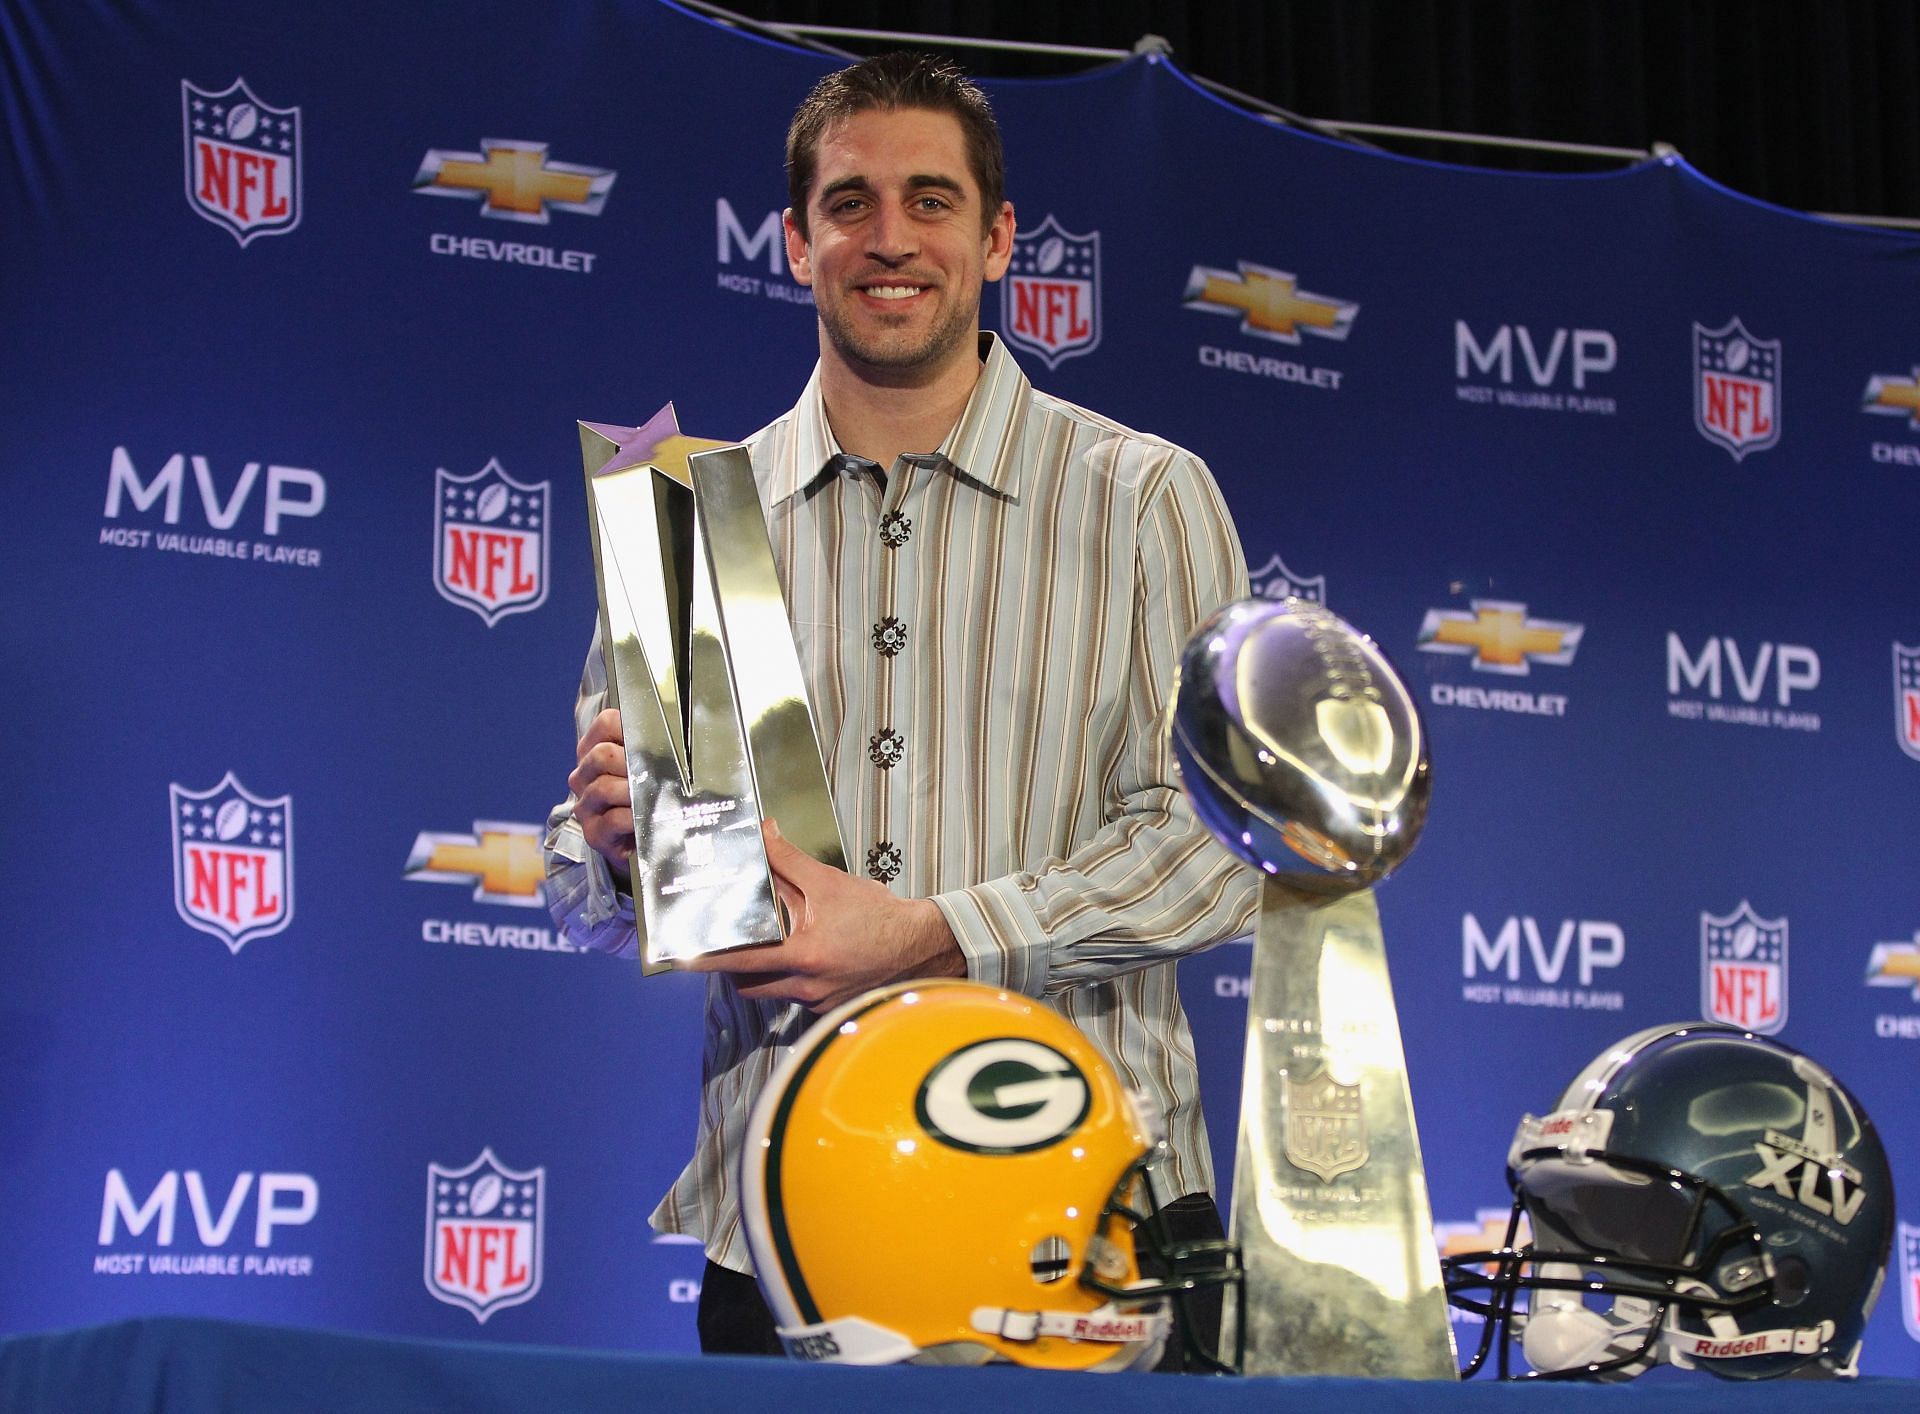 Super Bowl XLV MVP and winning coach news conference